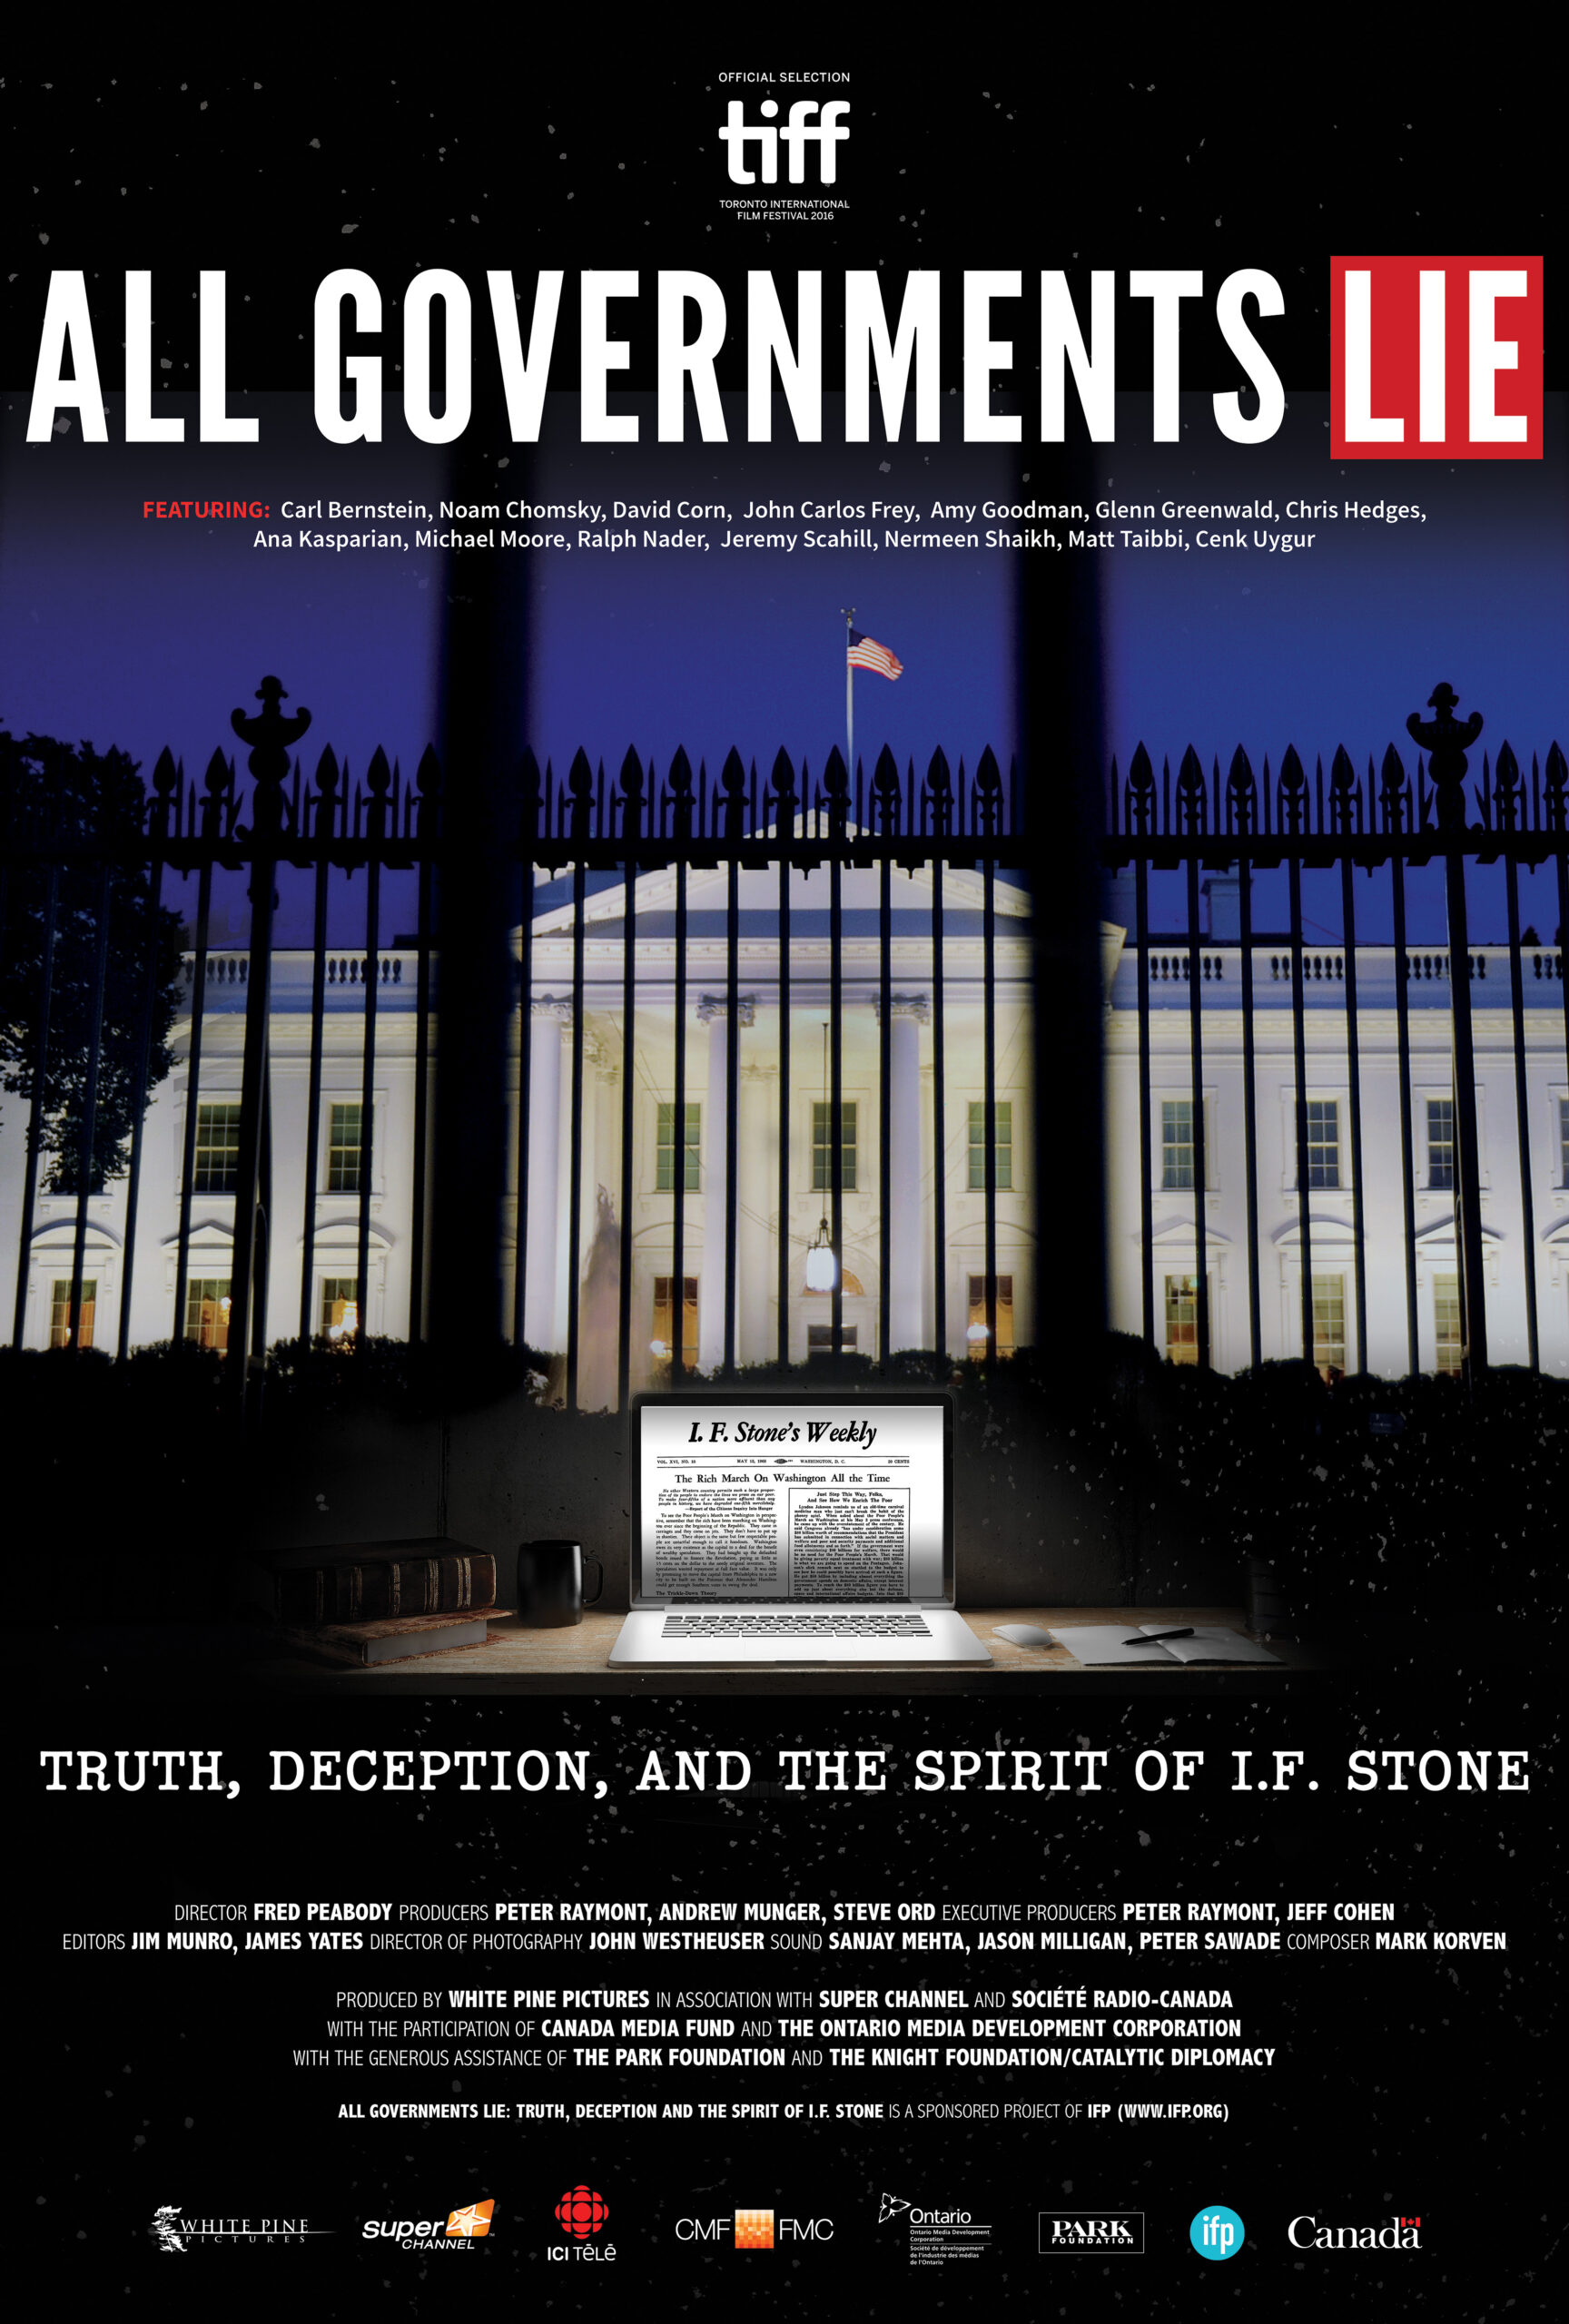 Trailer Alert: All Governments Lie: Truth, Deception, and the Spirit of I.F. Stone